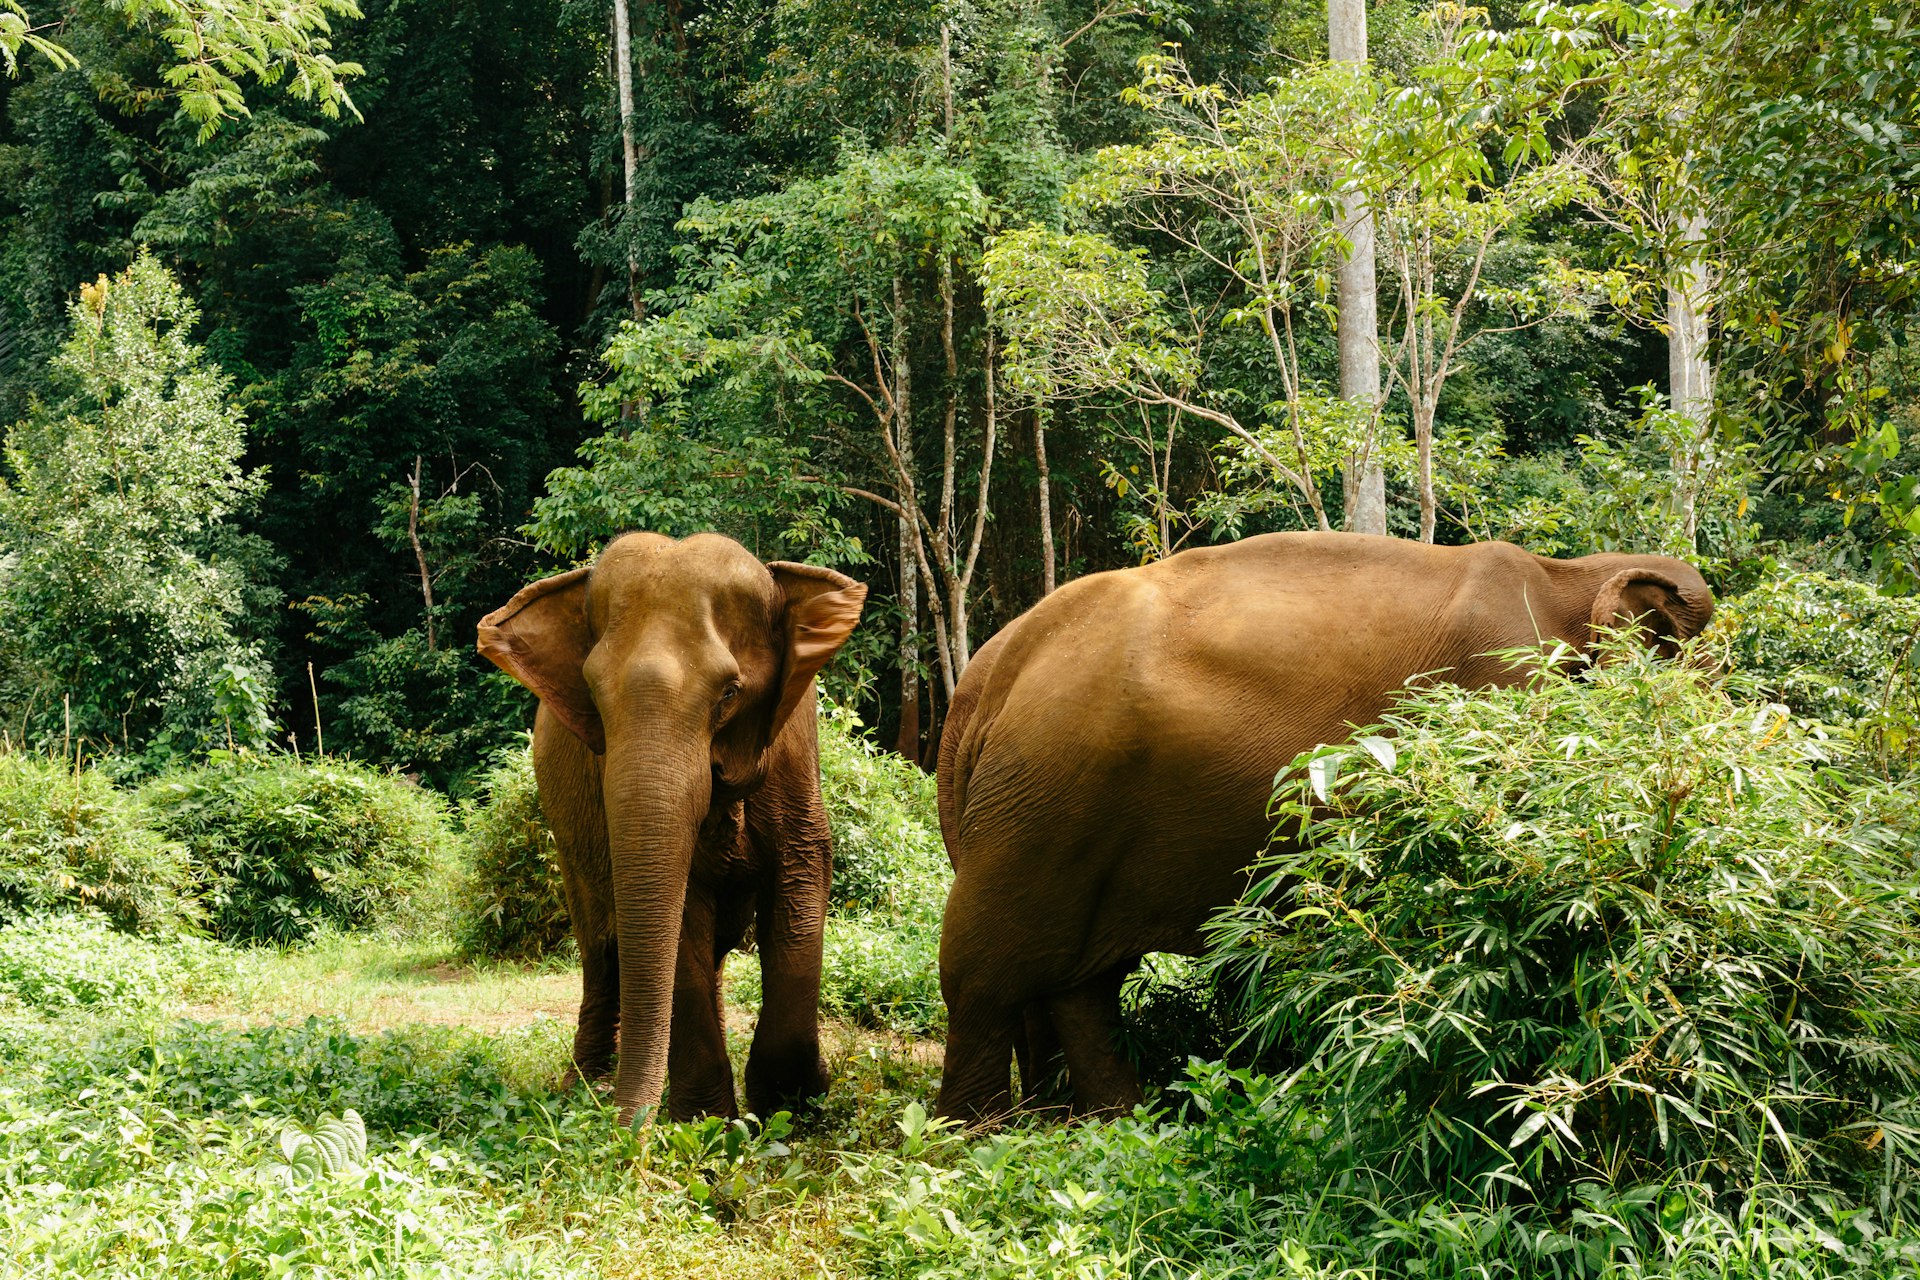 Elephants in the jungles of Mondulkiri, from the Elephant Valley Project